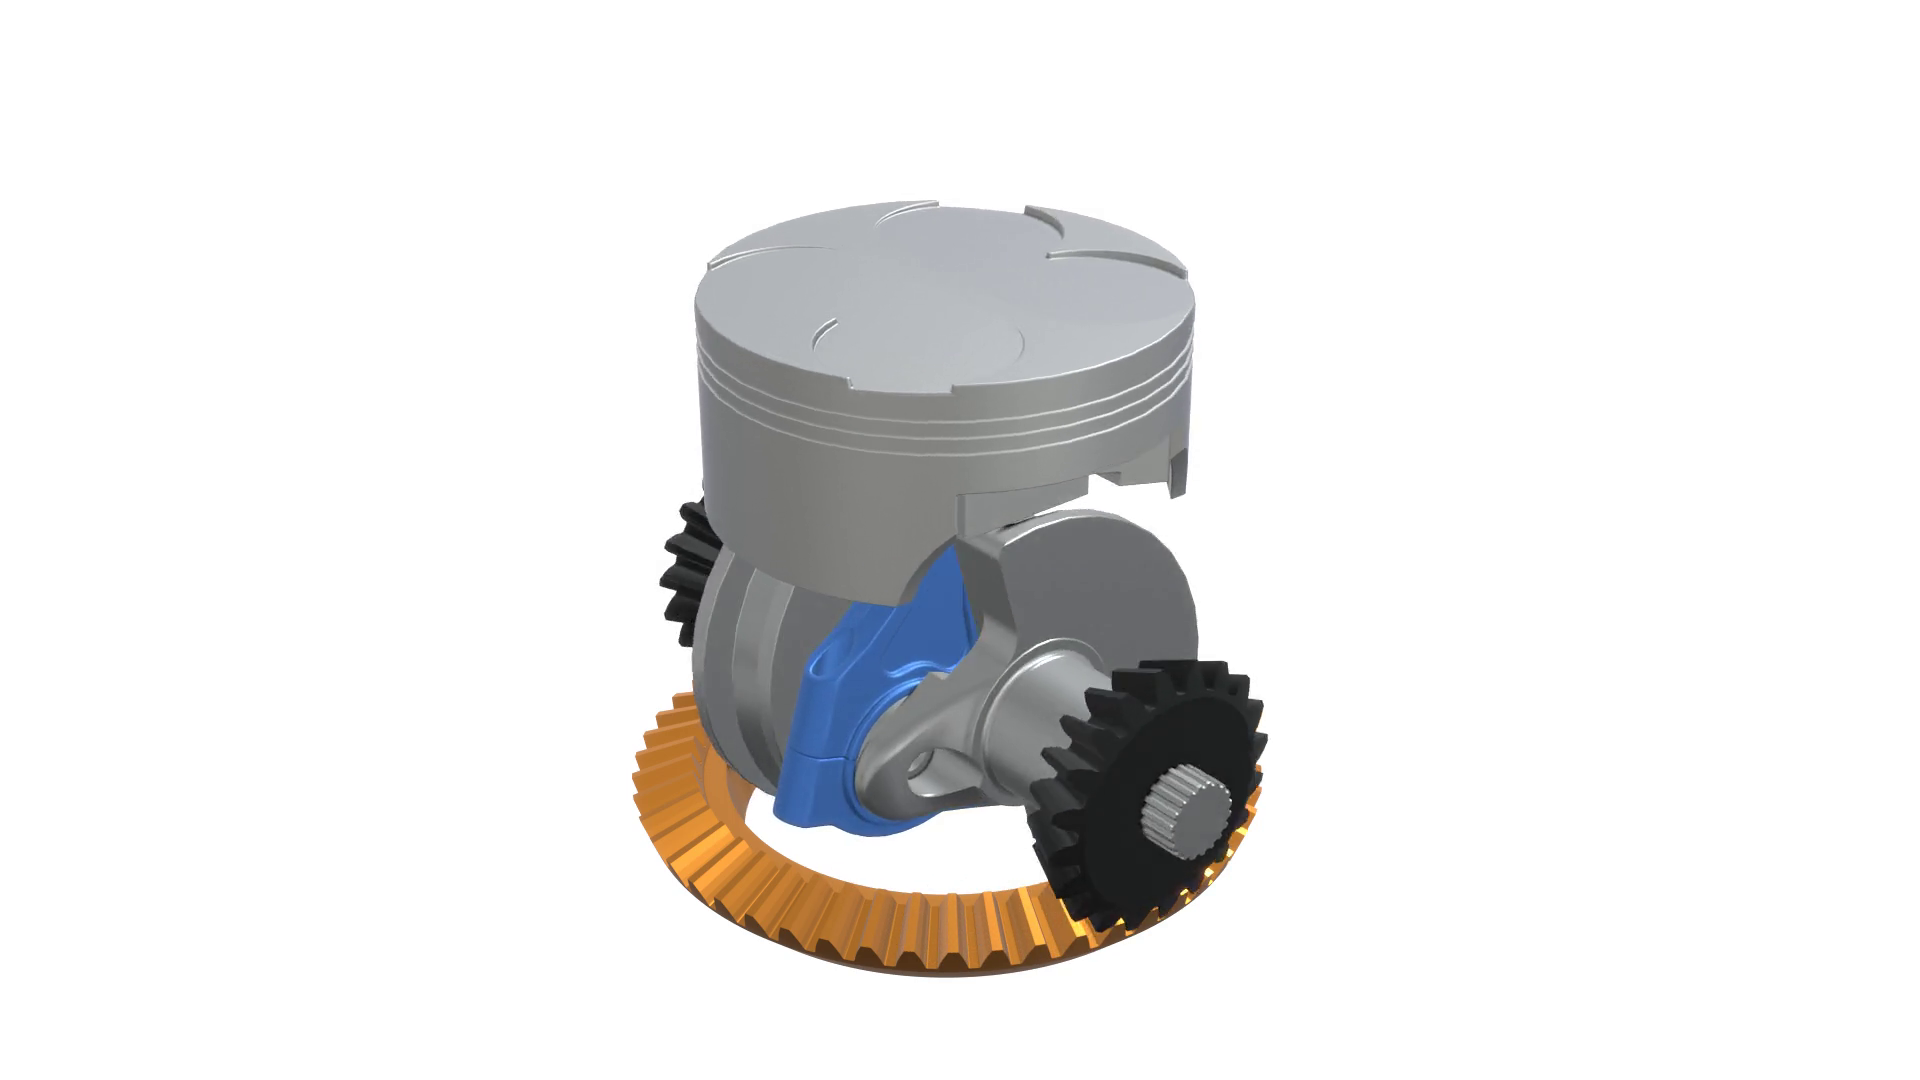 Read more about the article Bevel Gear Engine Mechanism in Blender